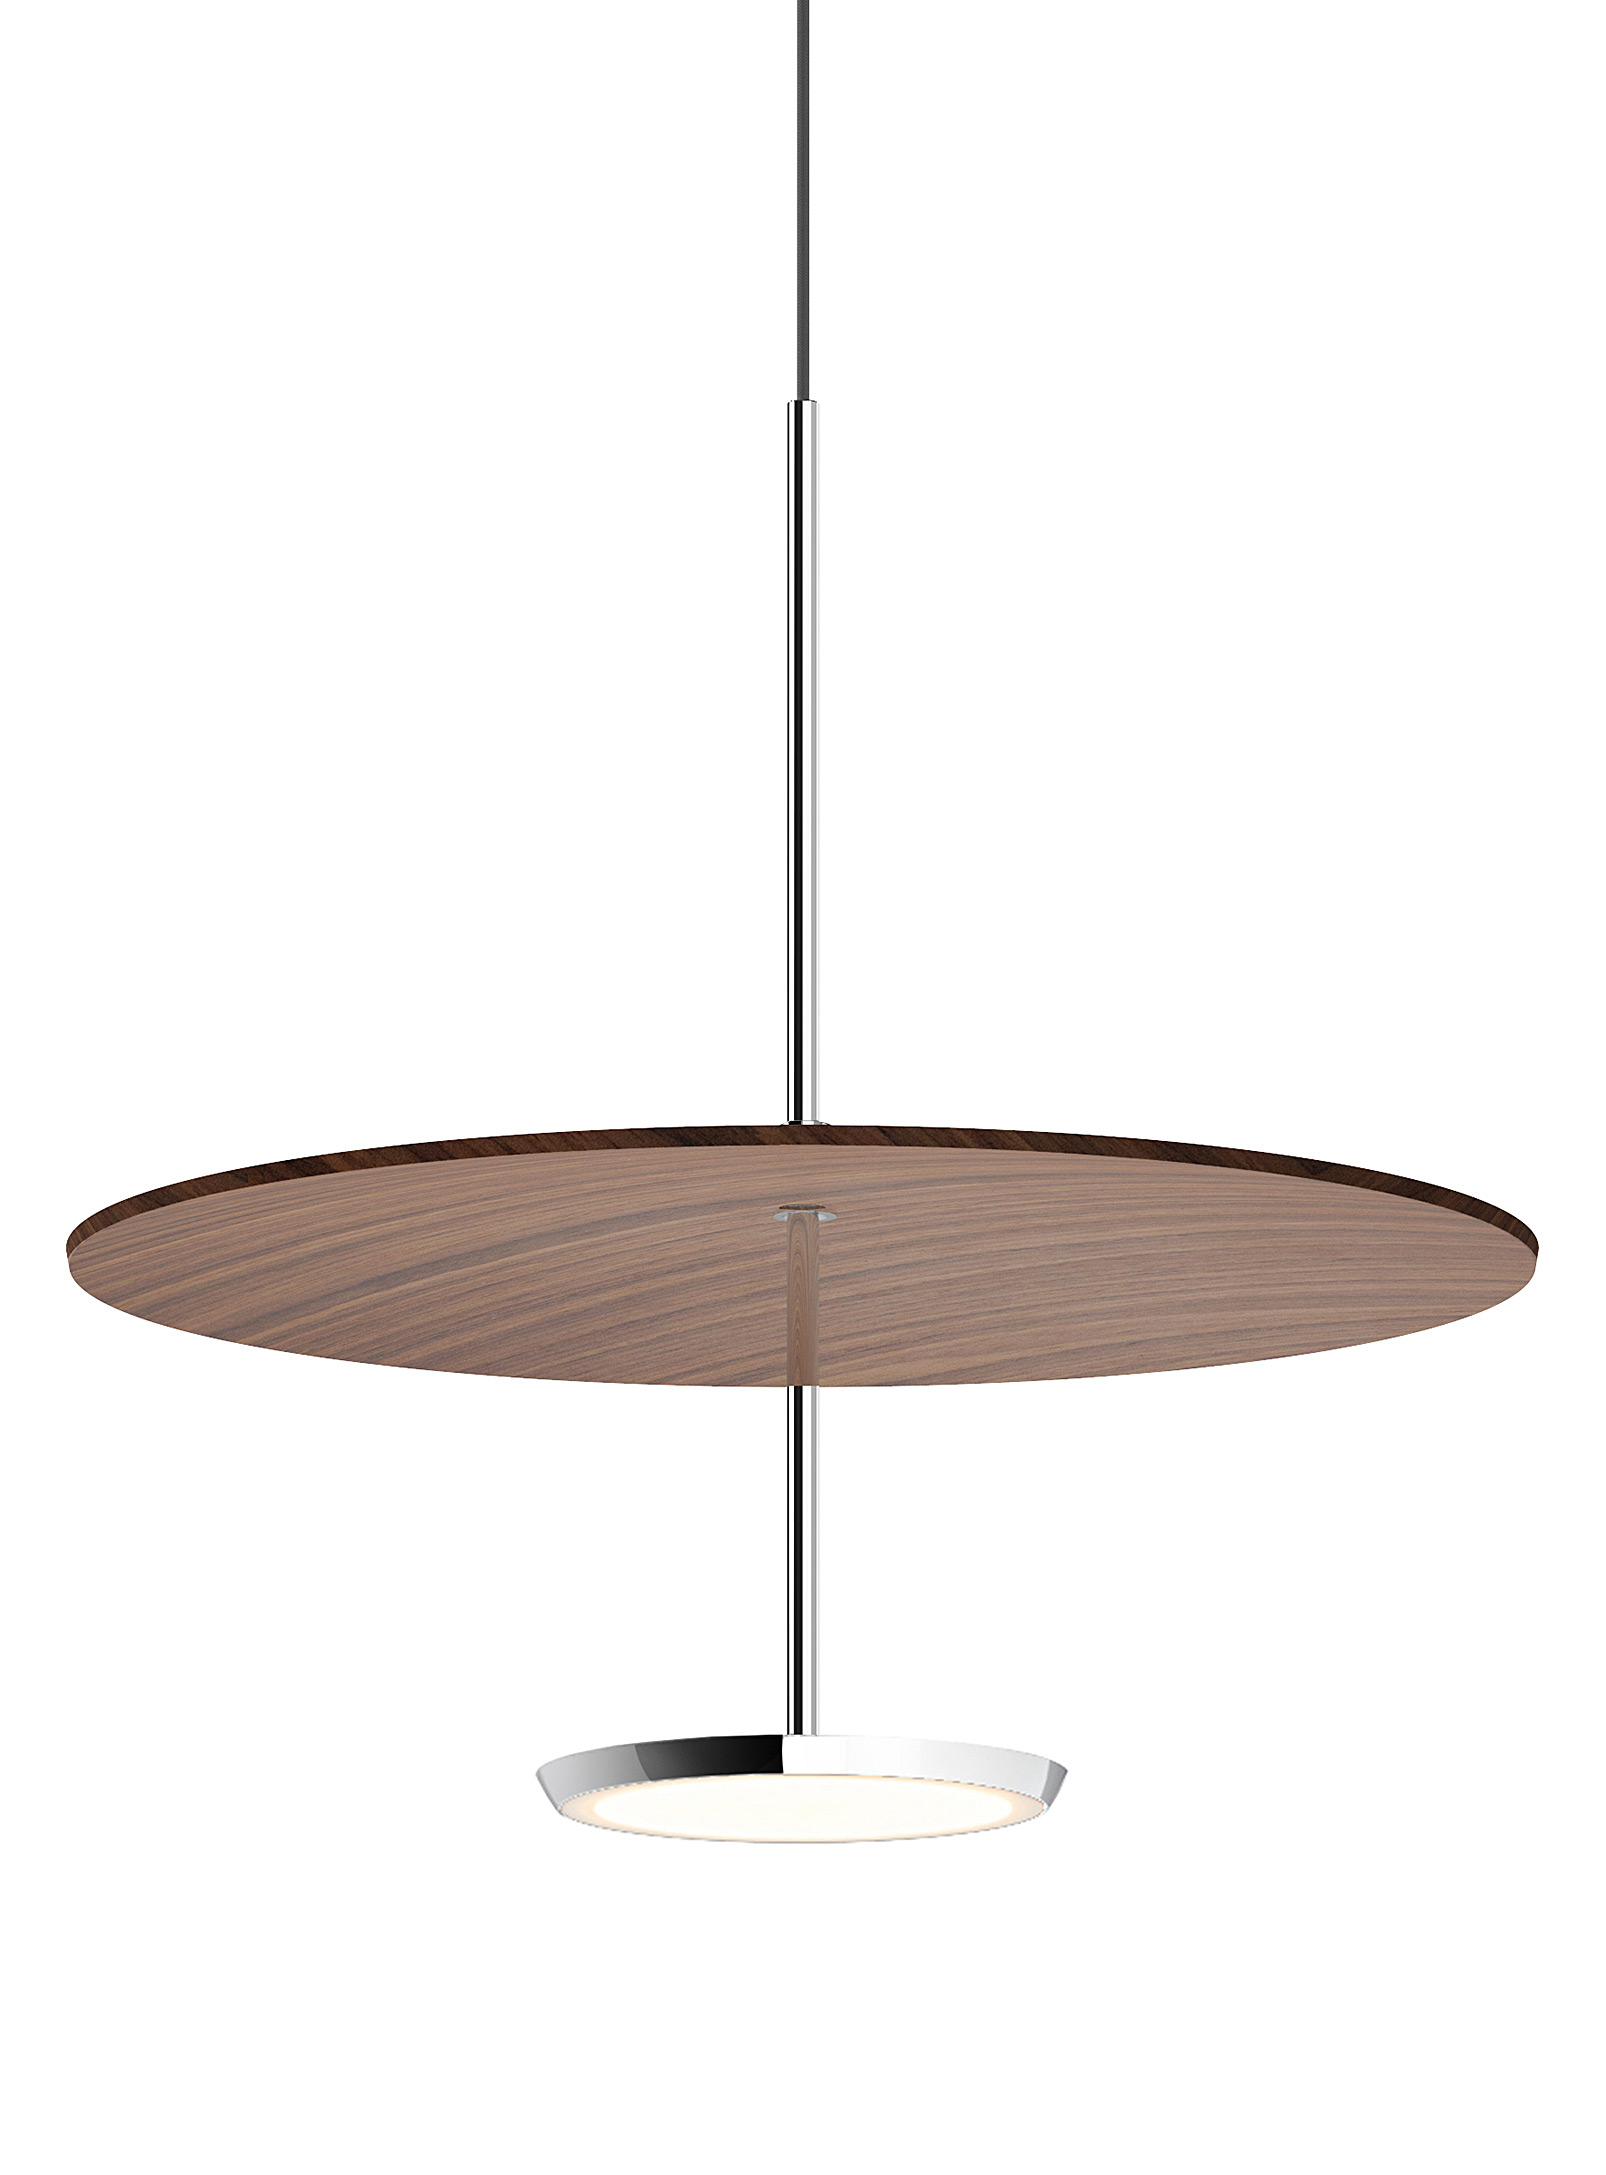 Pablo Designs Sky Dome Wood Hanging Lamp See Available Sizes In Dark Brown